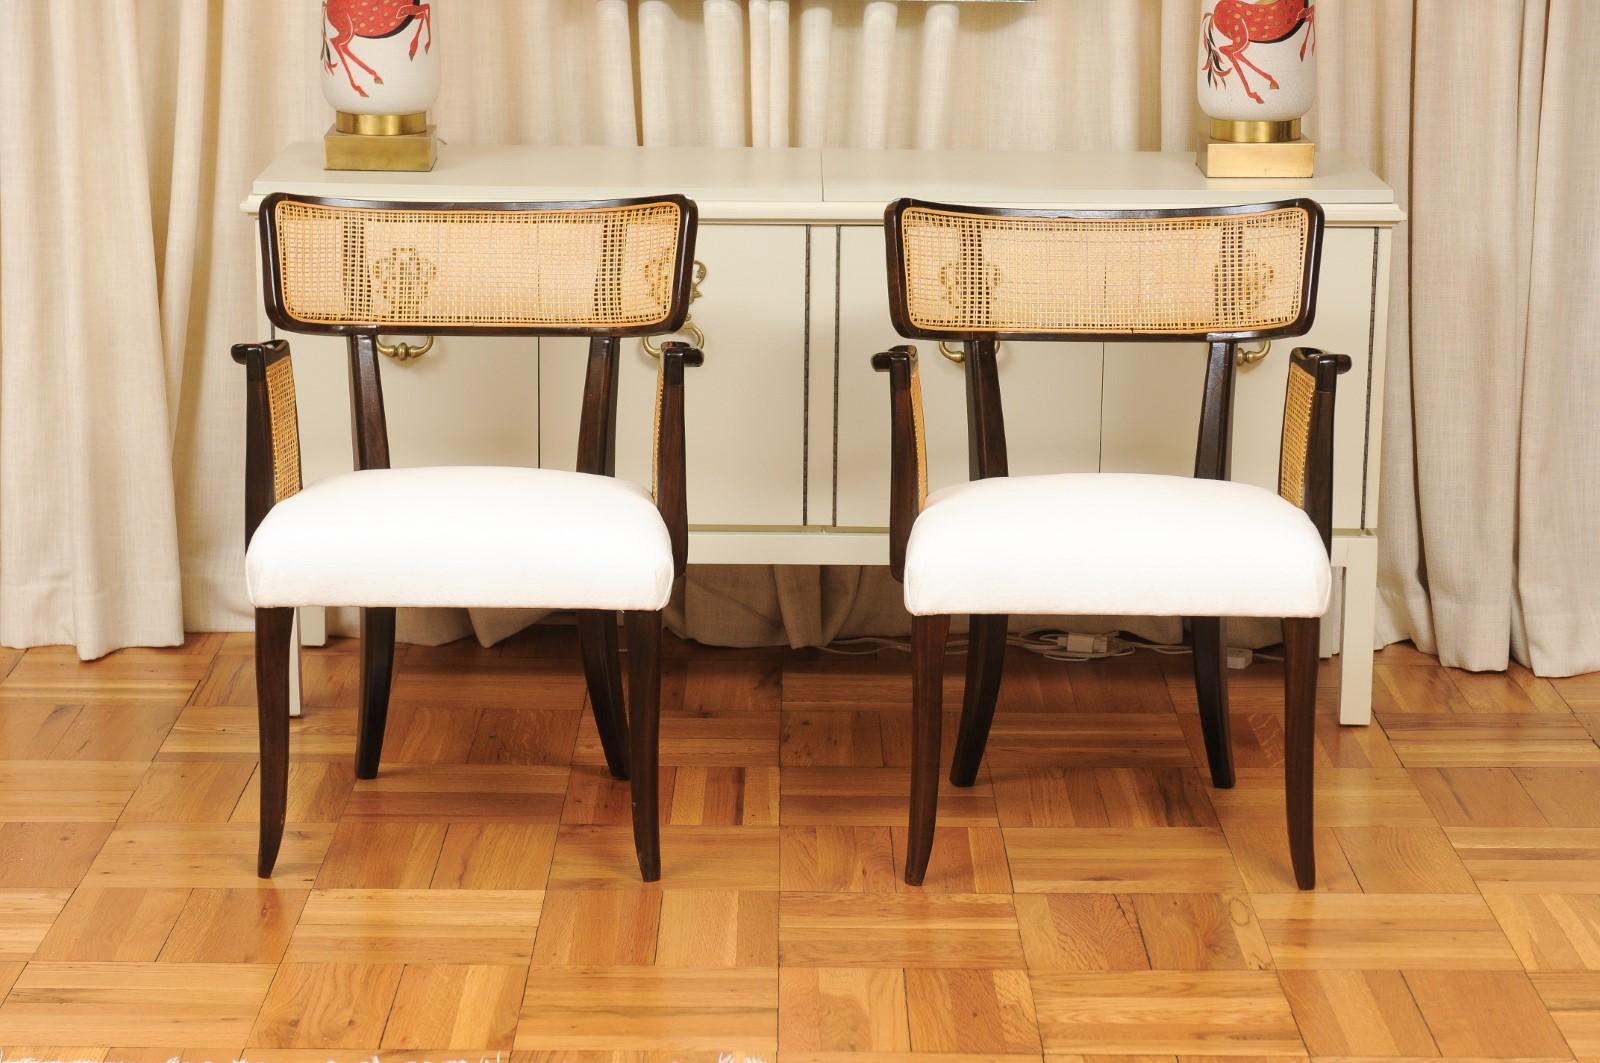 All Arms- Miraculous Set of 14 Arm Klismos Cane Dining Chairs by Edward Wormley In Excellent Condition For Sale In Atlanta, GA